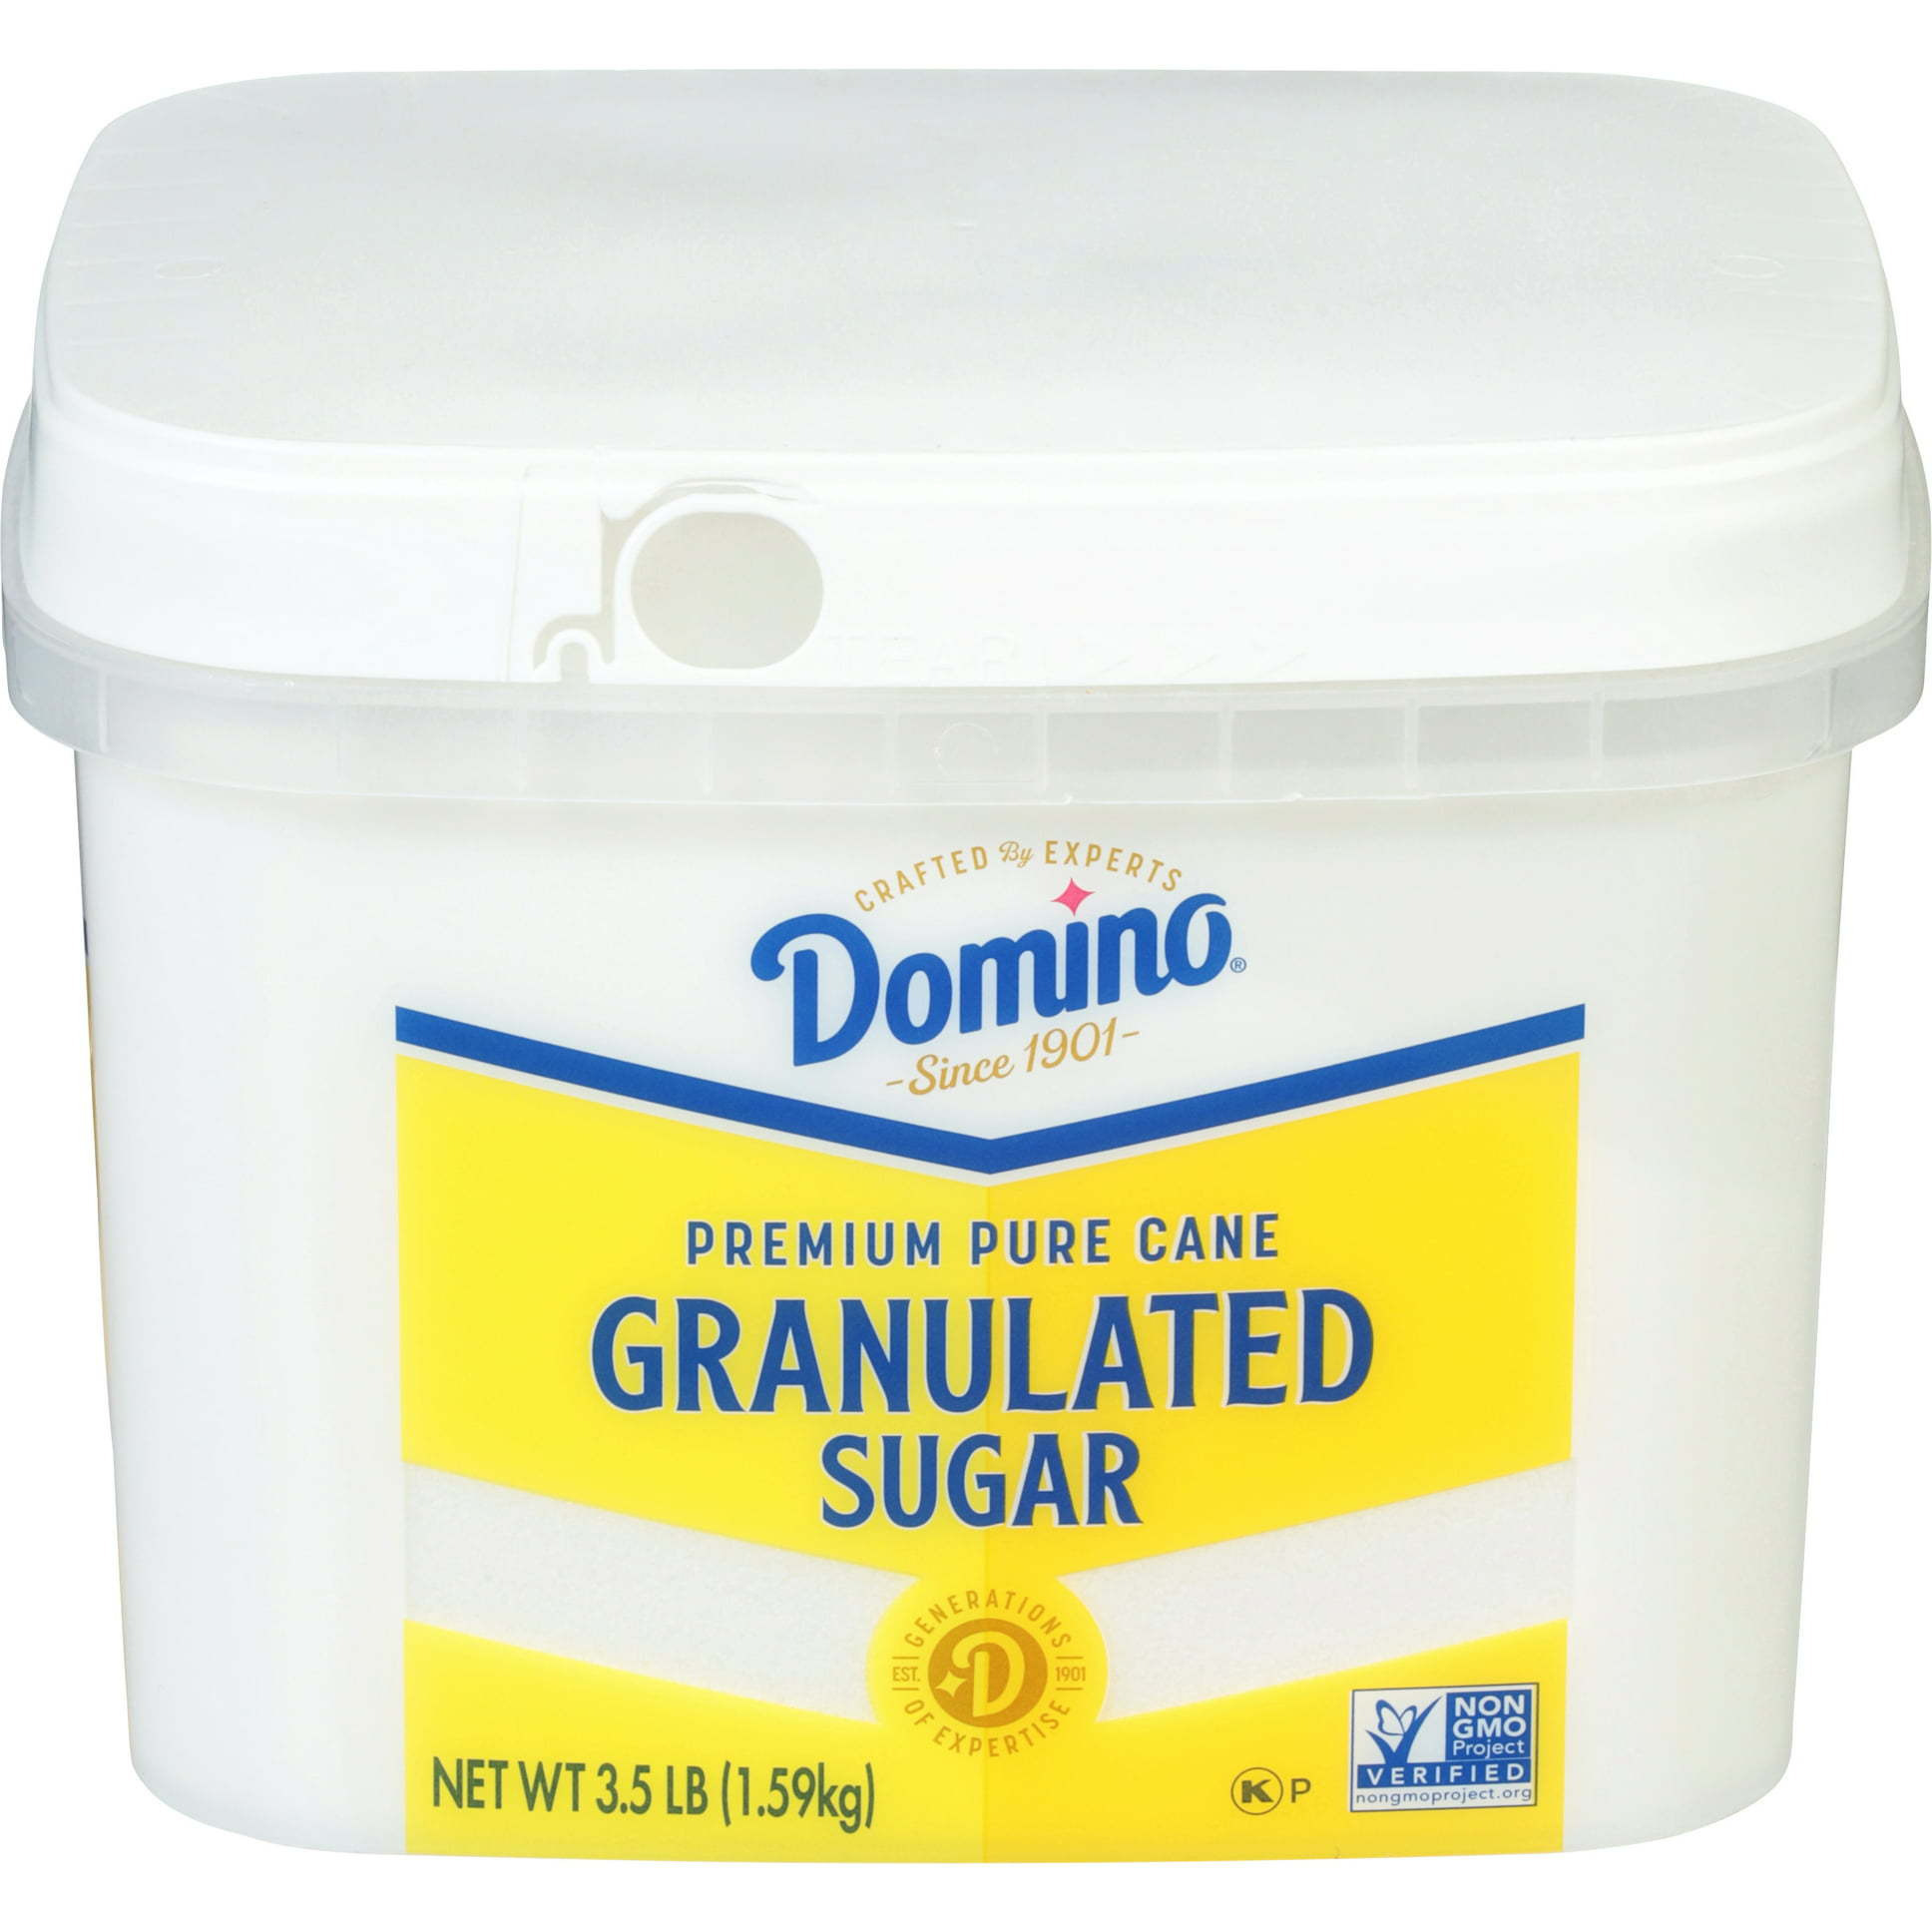 Pack of 2 - Domino Pure Cane Granulated Sugar Tub - 3.5 Lb (1.59 Kg)